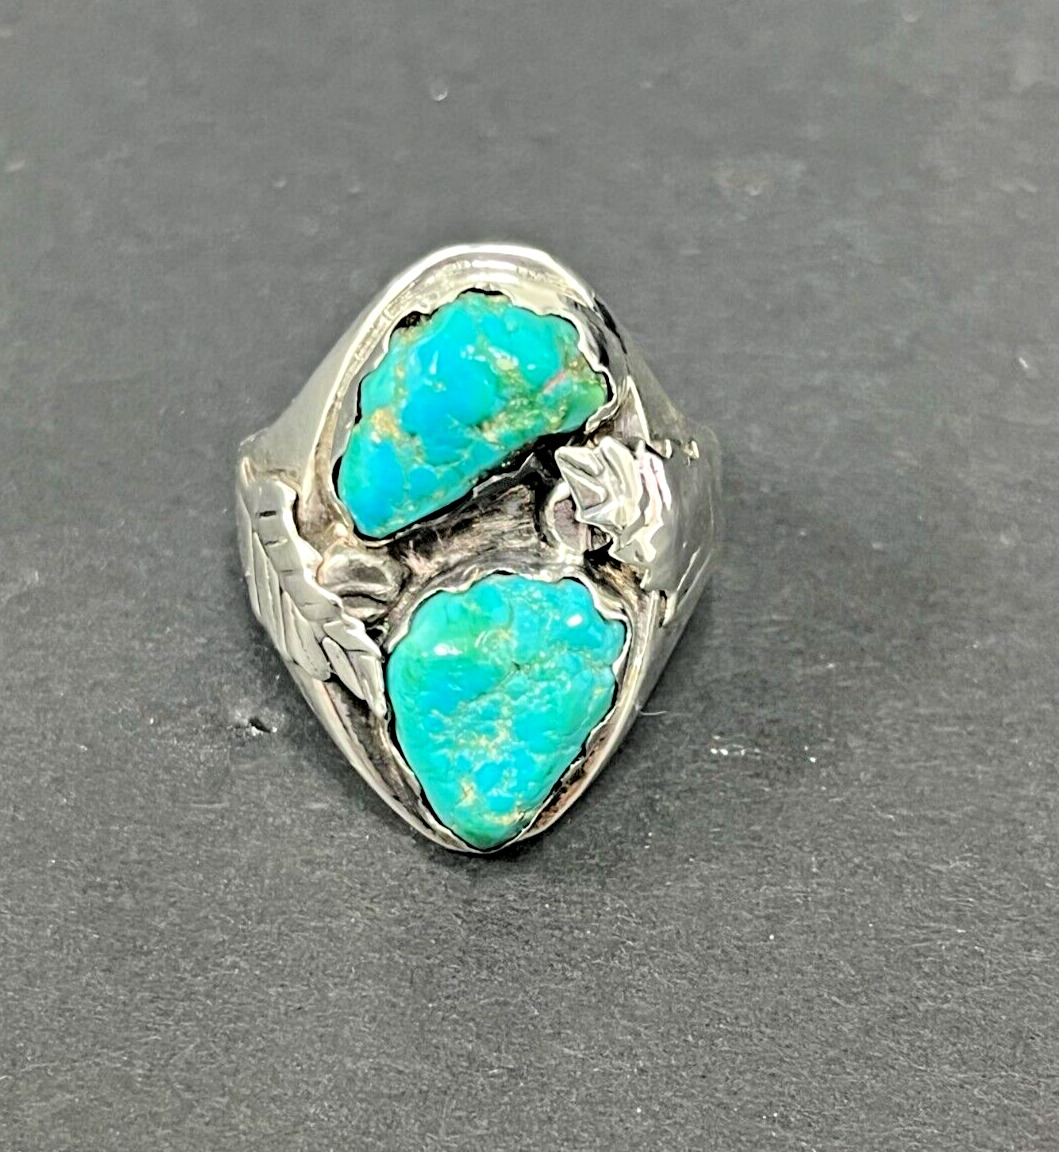 Vintage Horace Iule Zuni Ring 925 Sterling Turquoise with leaves Size 11.5 Heavy